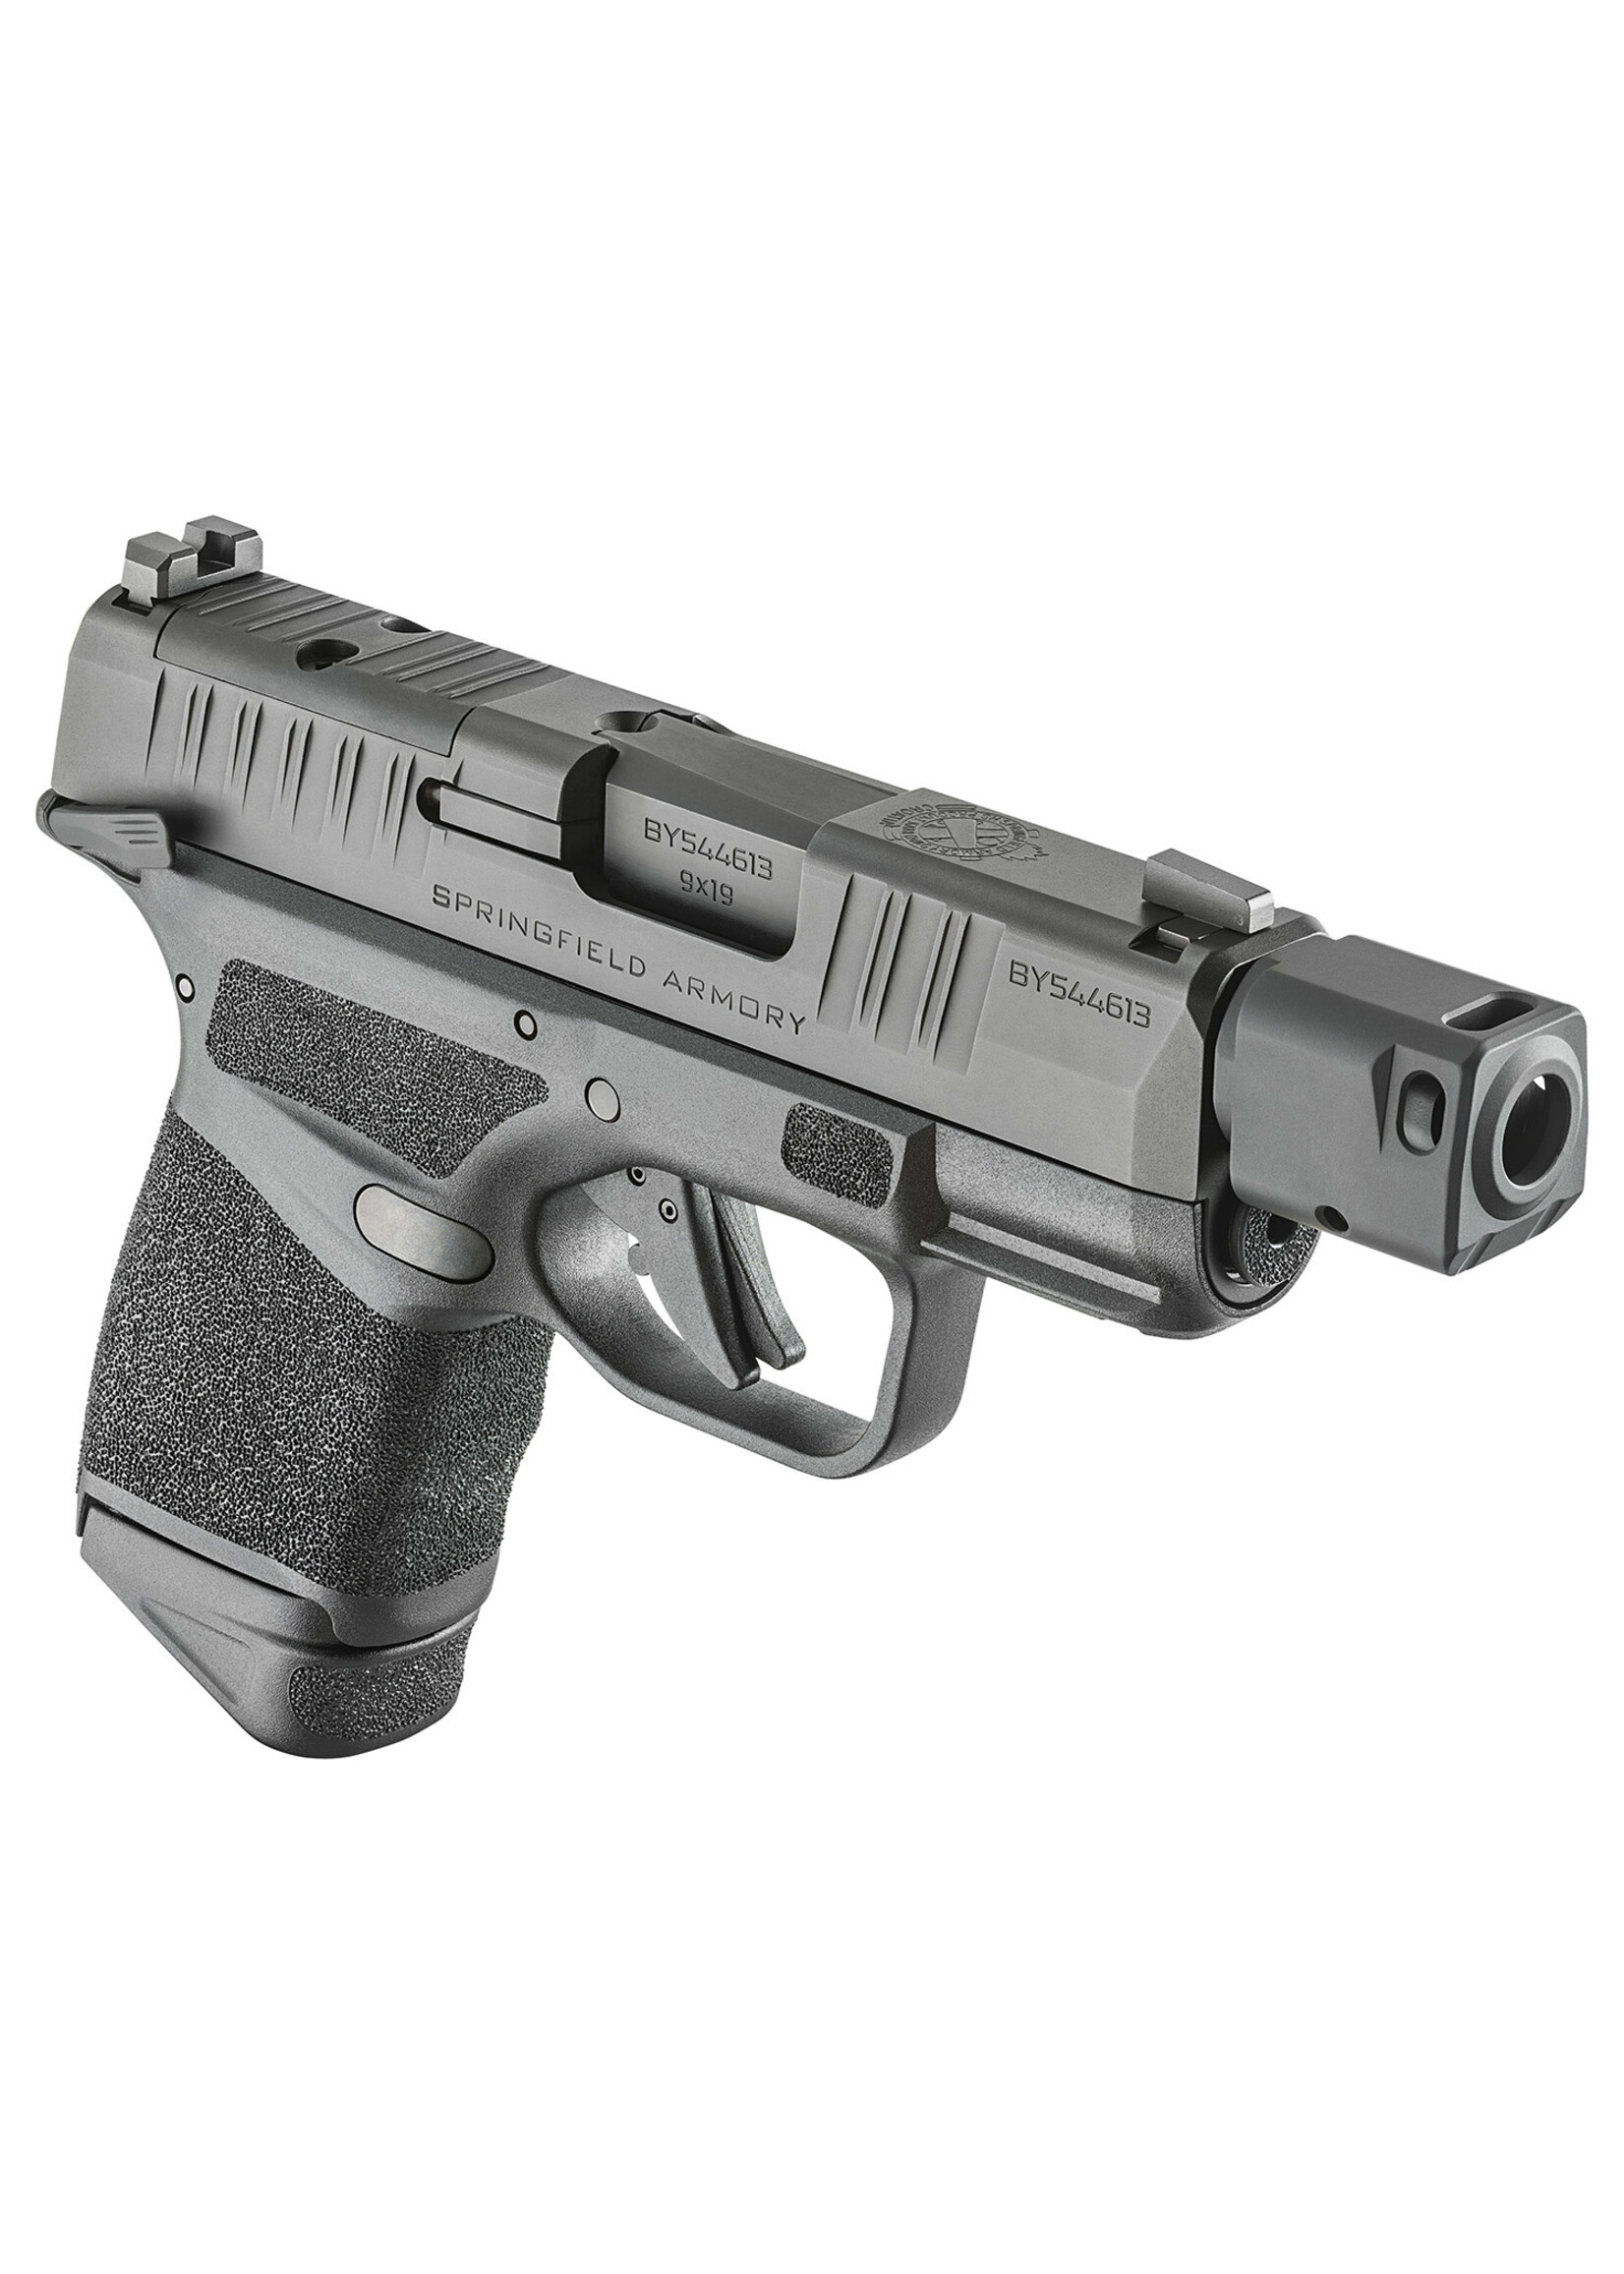 Springfield Armory Springfield Armory HC9389BTOSPMS Hellcat Micro-Compact RDP 9mm Luger 13+1/11+1 3.80" Threaded/Compensated Barrel, Black Polymer Frame w/Picatinny Acc. Rail & Adaptive Grip Texture, Optic Ready Slide, Ambidextrous Manual Thumb Safety